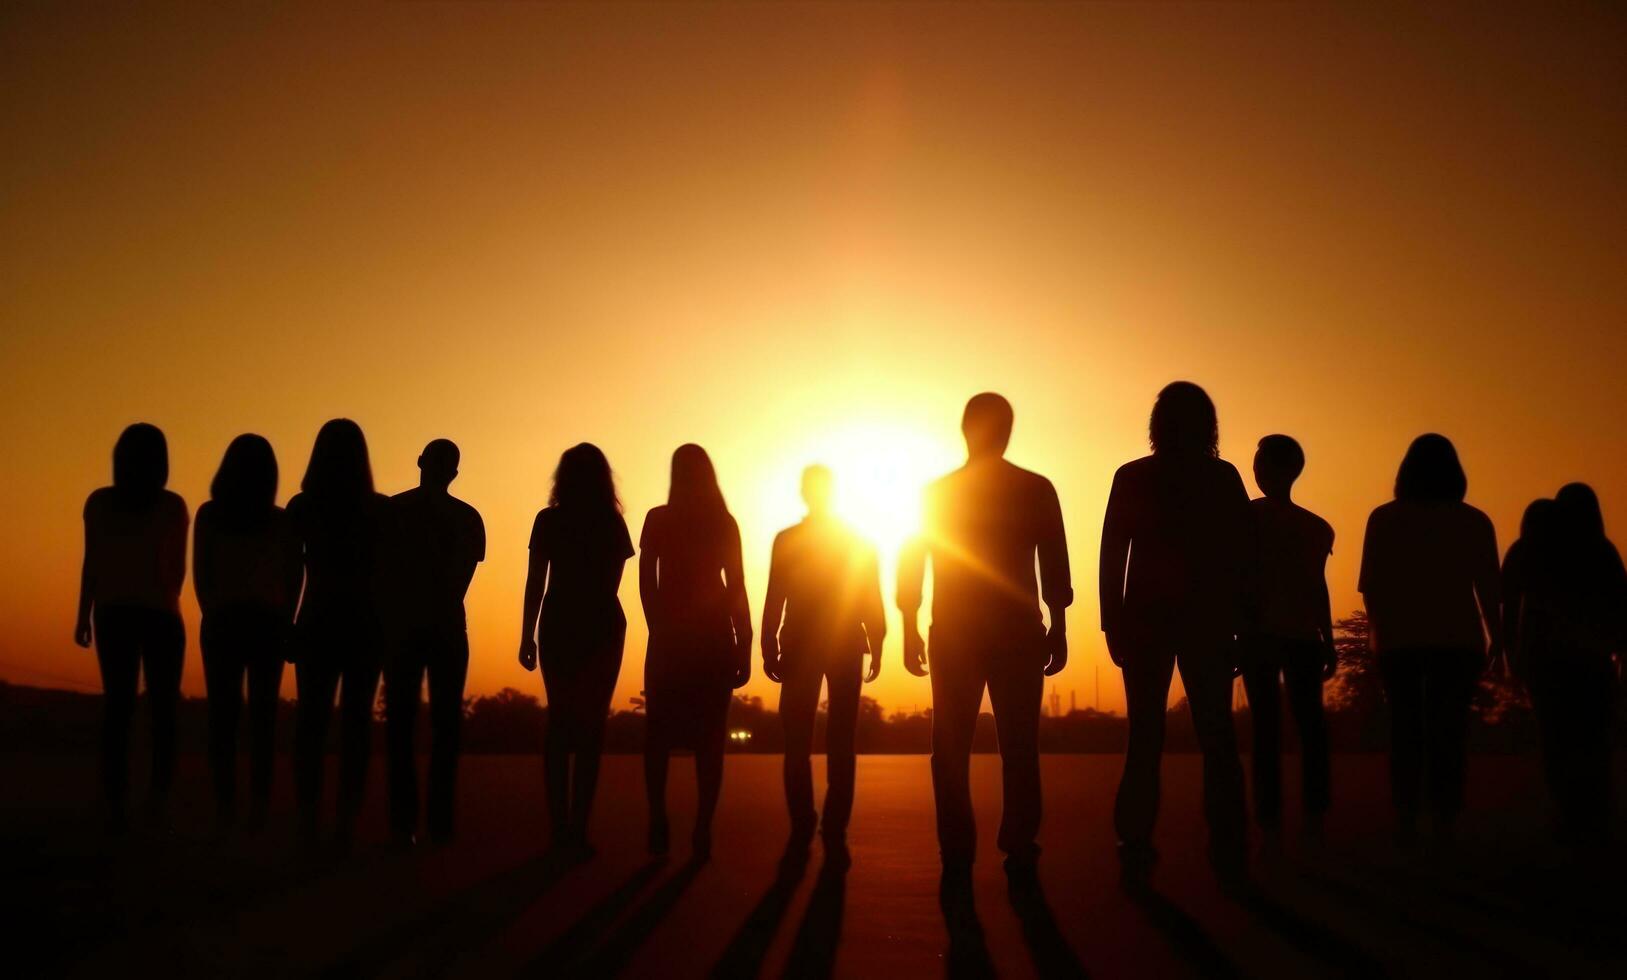 Group of people silhouette in the sunset photo